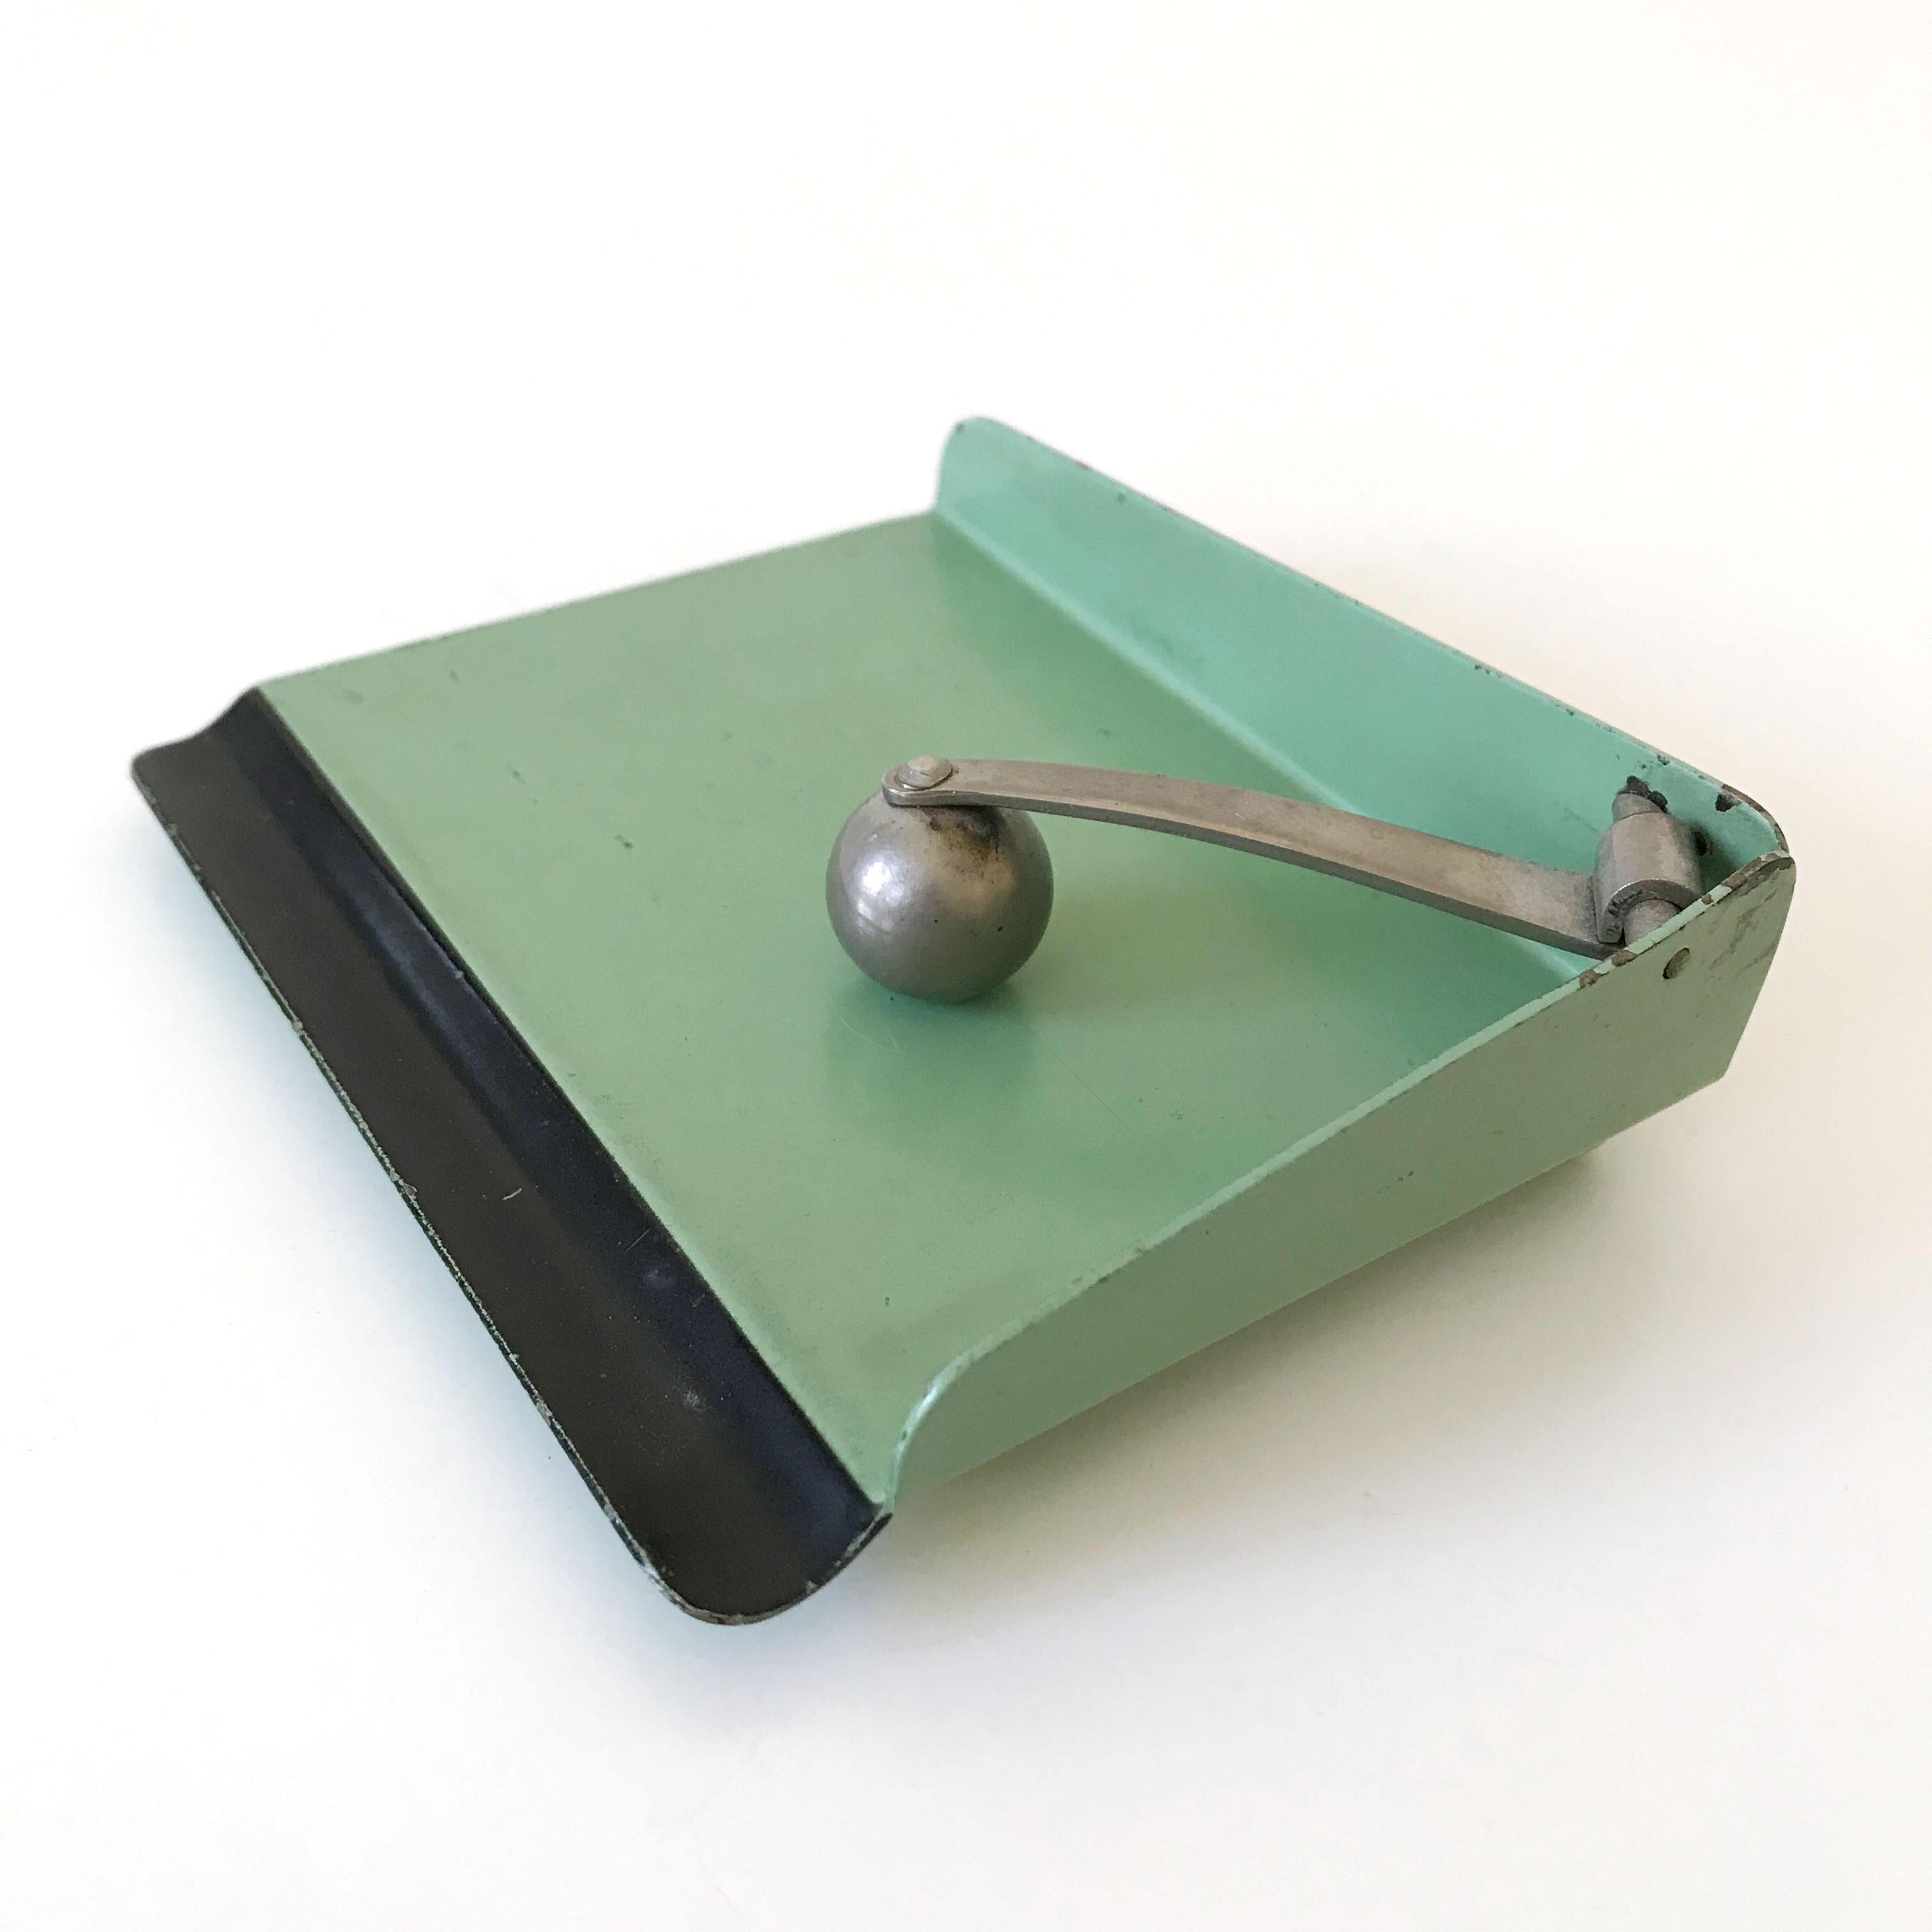 Original Bauhaus paper holder. Designed by the famous Bauhaus master Marianne Brandt for Ruppelwerk, Gotha, Germany, 1930s. A real collectors item.

This hard to find original Bauhaus piece is executed in green and black lacquered metal and